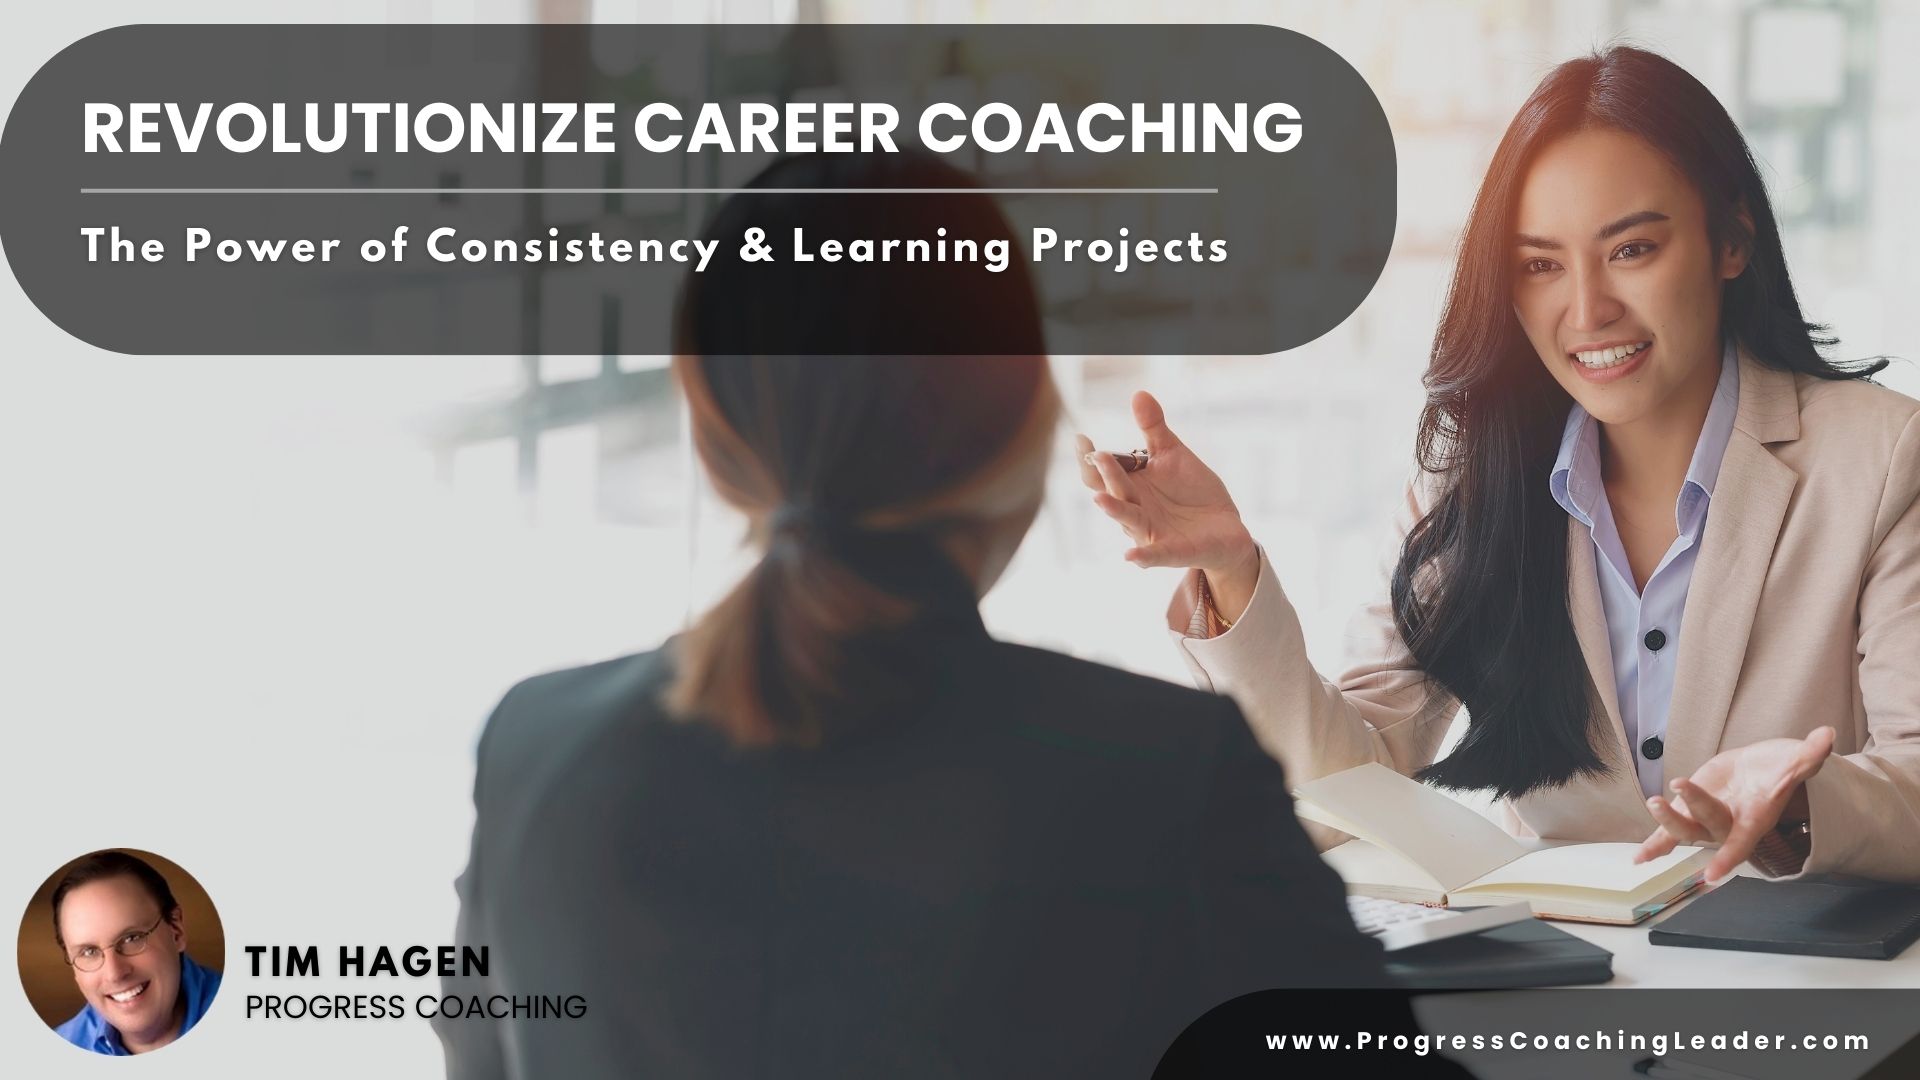 Revolutionizing Career Coaching: The Power of Consistency & Learning Projects